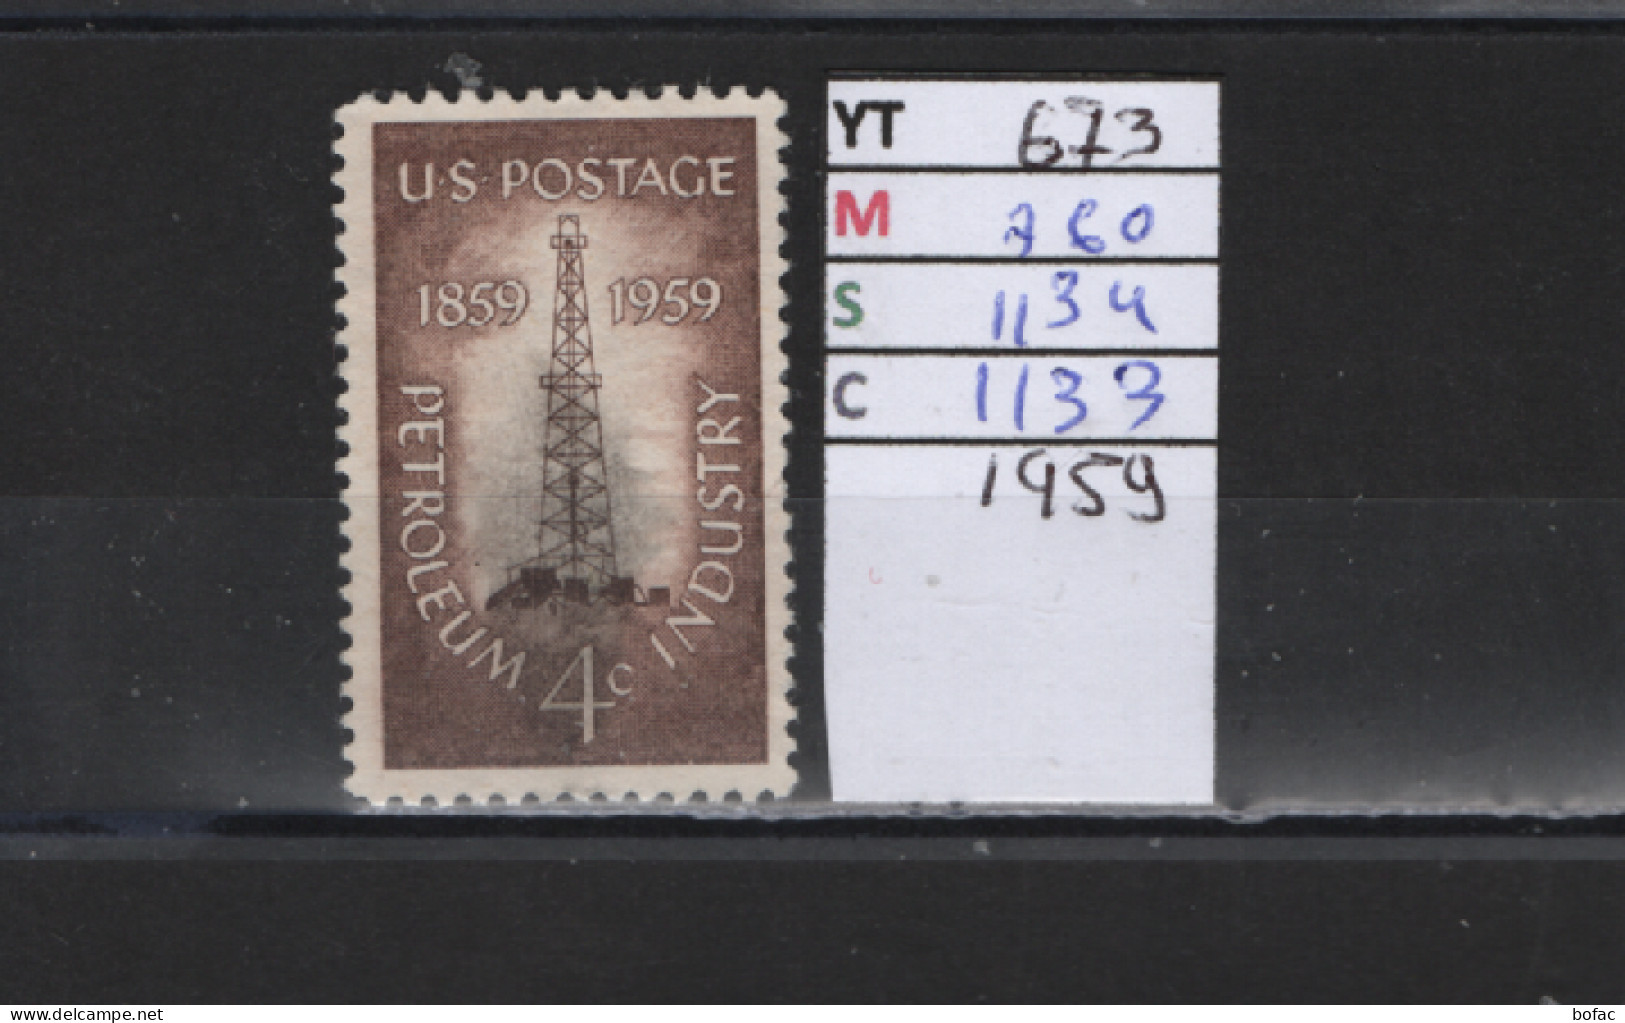 PRIX FIXE Obl  673 YT 760 MIC 113 SCO GIB Pétrole Industry Derrick 1959  58A/08 - Used Stamps